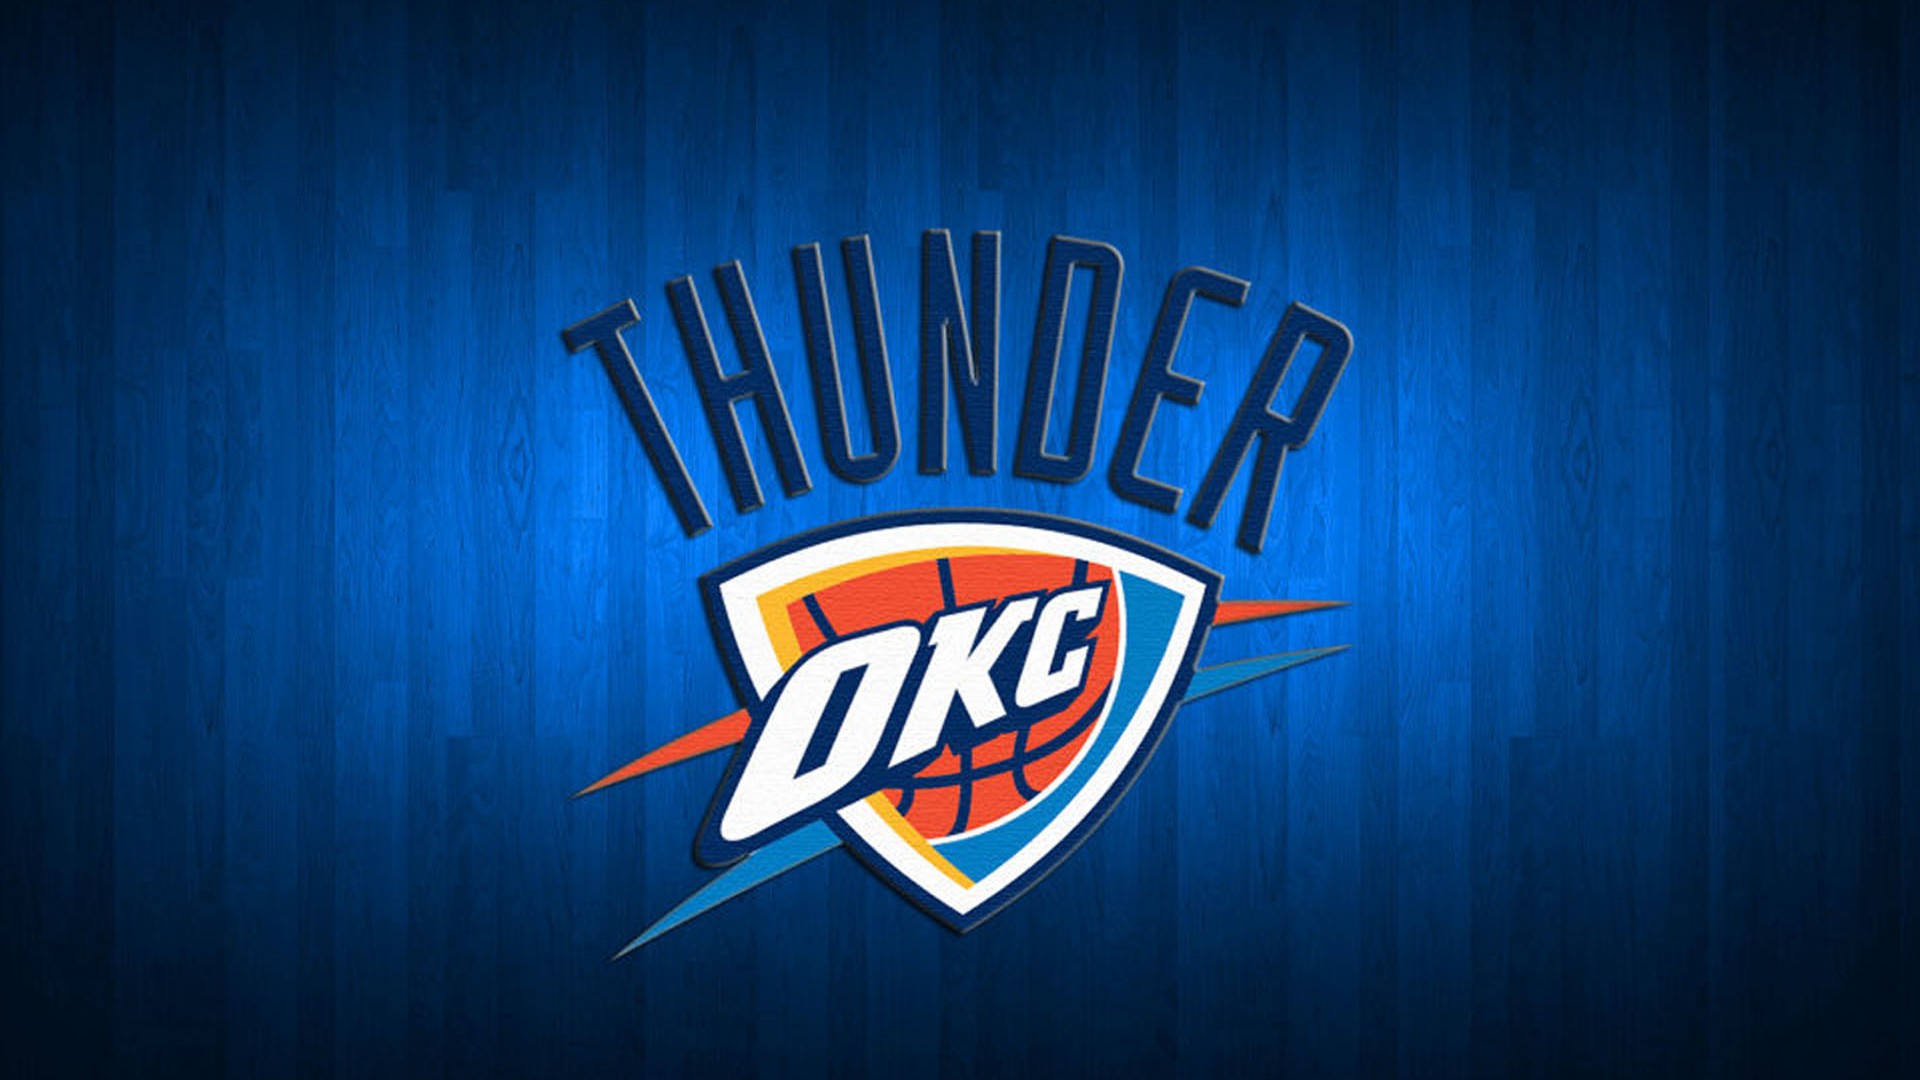 HD Desktop Wallpaper Oklahoma City Thunder with high-resolution 1920x1080 pixel. You can use this wallpaper for your Desktop Computer Backgrounds, Windows or Mac Screensavers, iPhone Lock screen, Tablet or Android and another Mobile Phone device